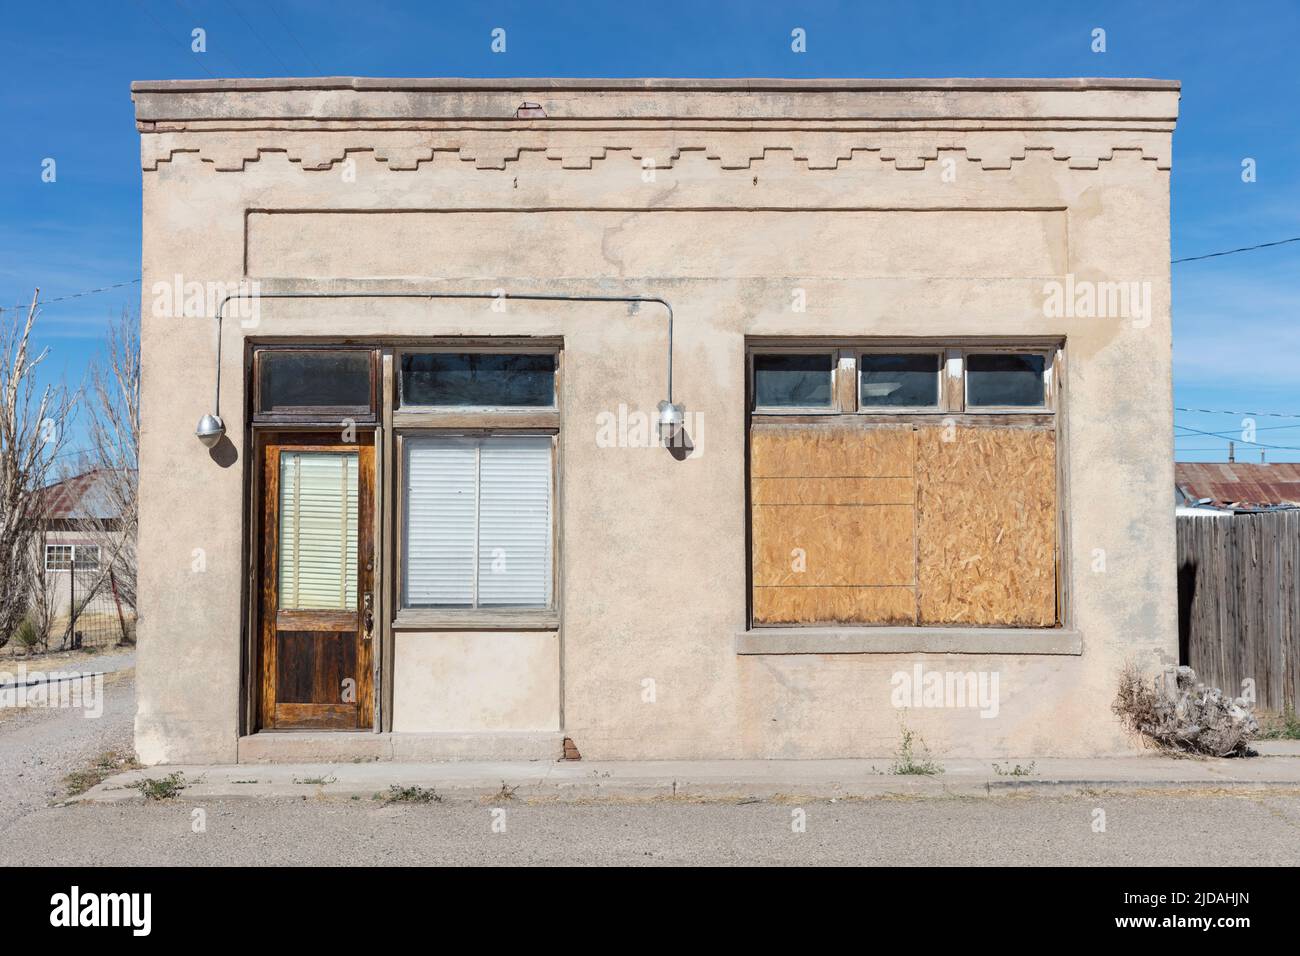 Abandoned building facade, boarded up windows and stonework pattern. Stock Photo